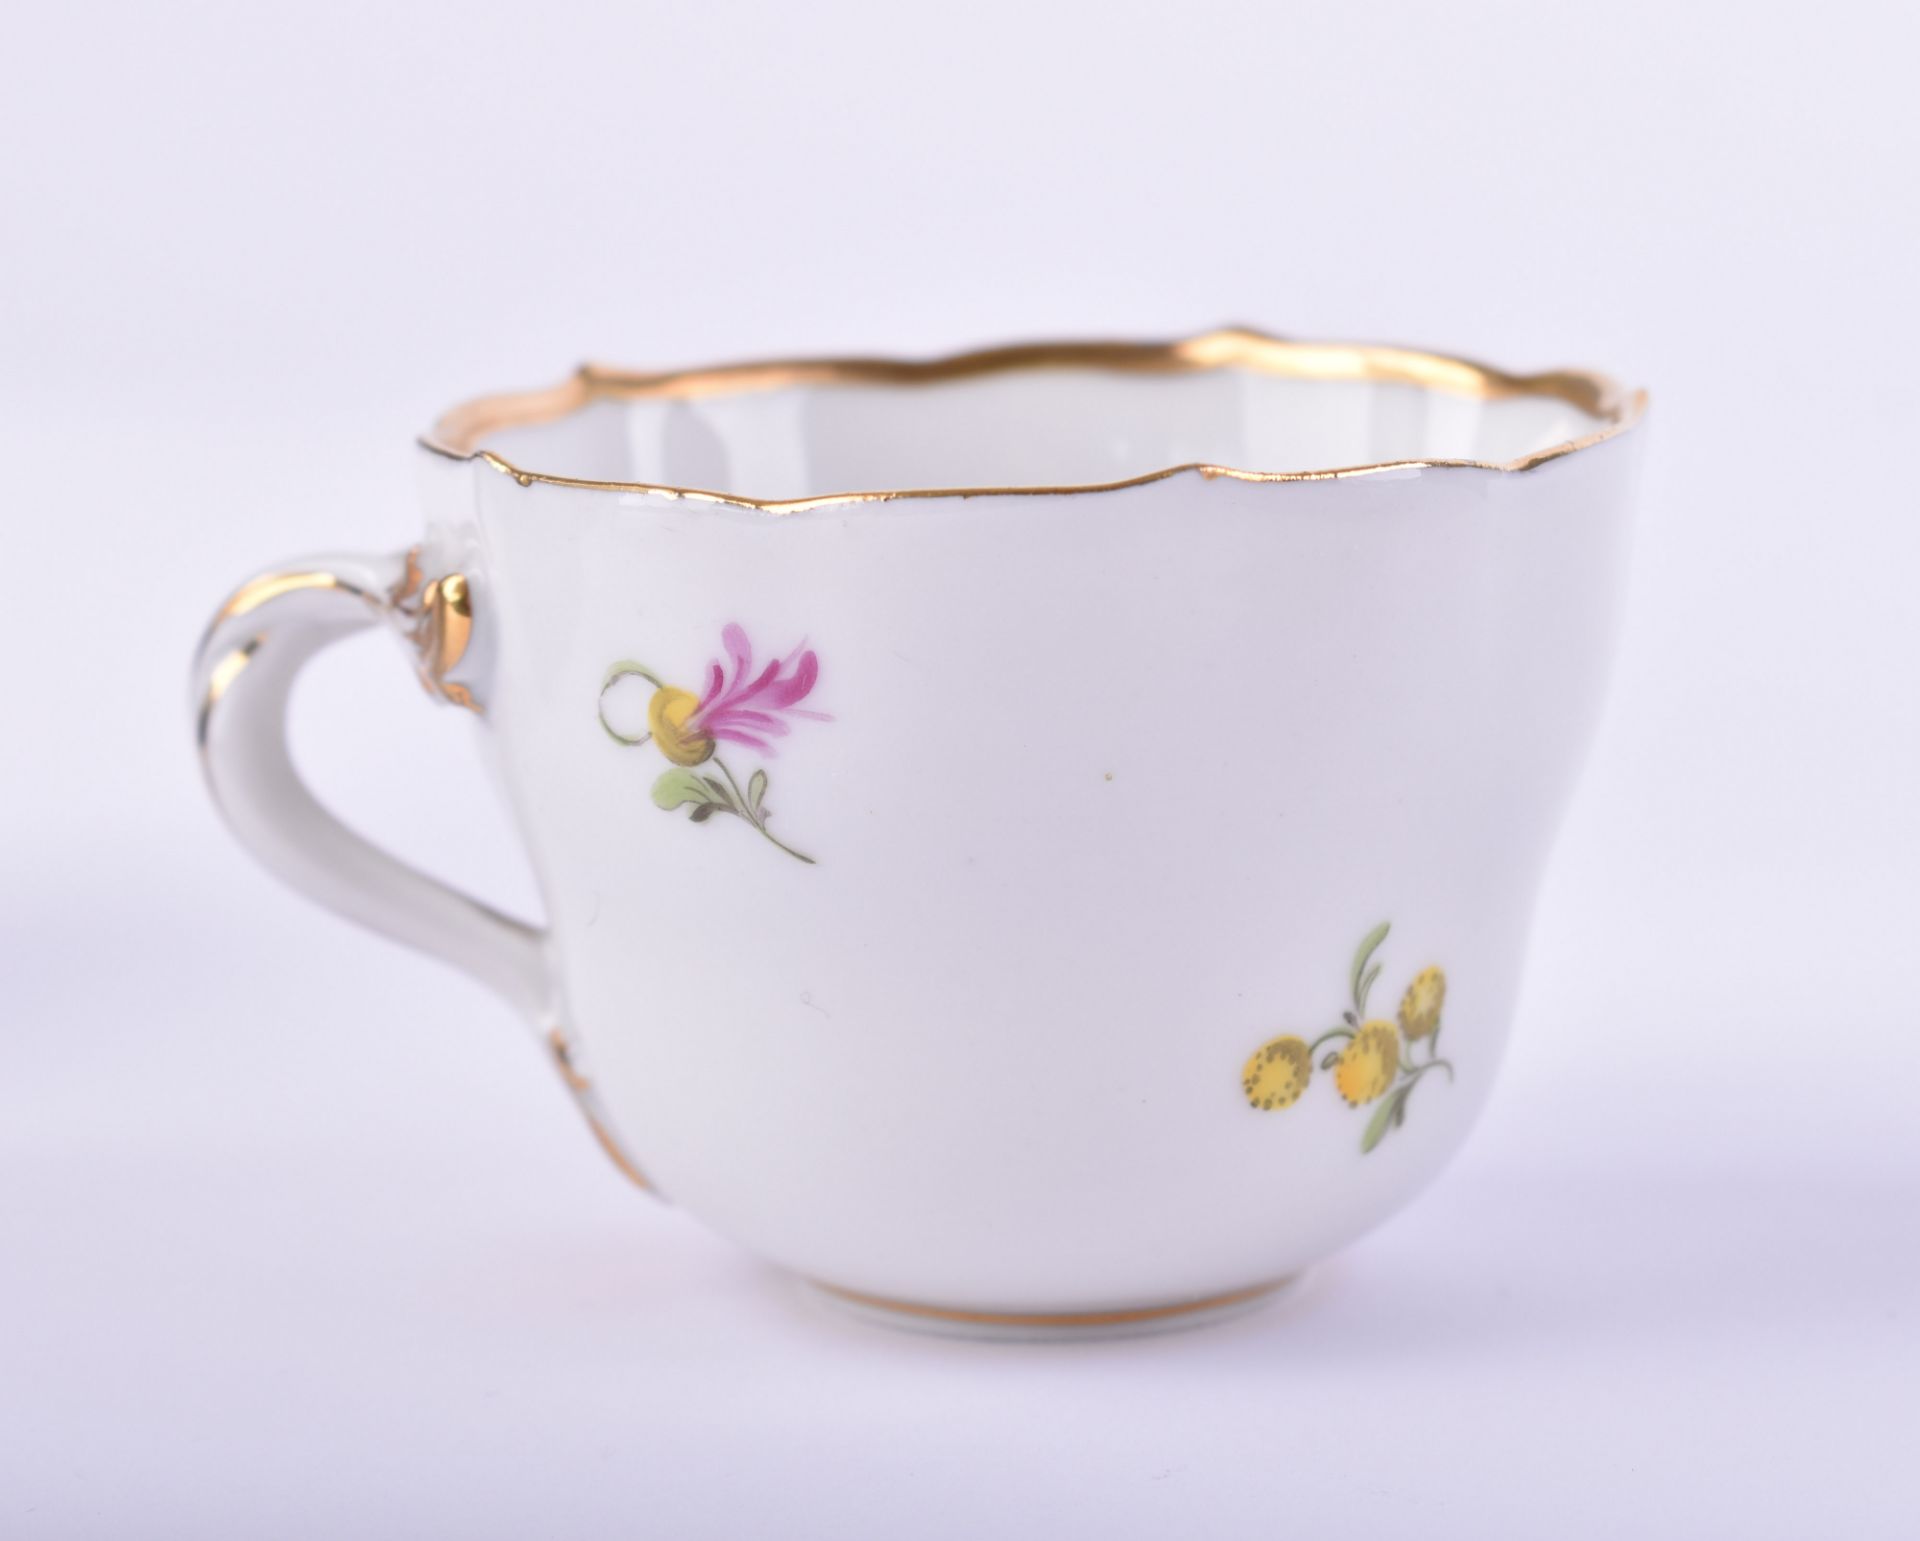  Mocha cup and saucer Meissen - Image 4 of 5